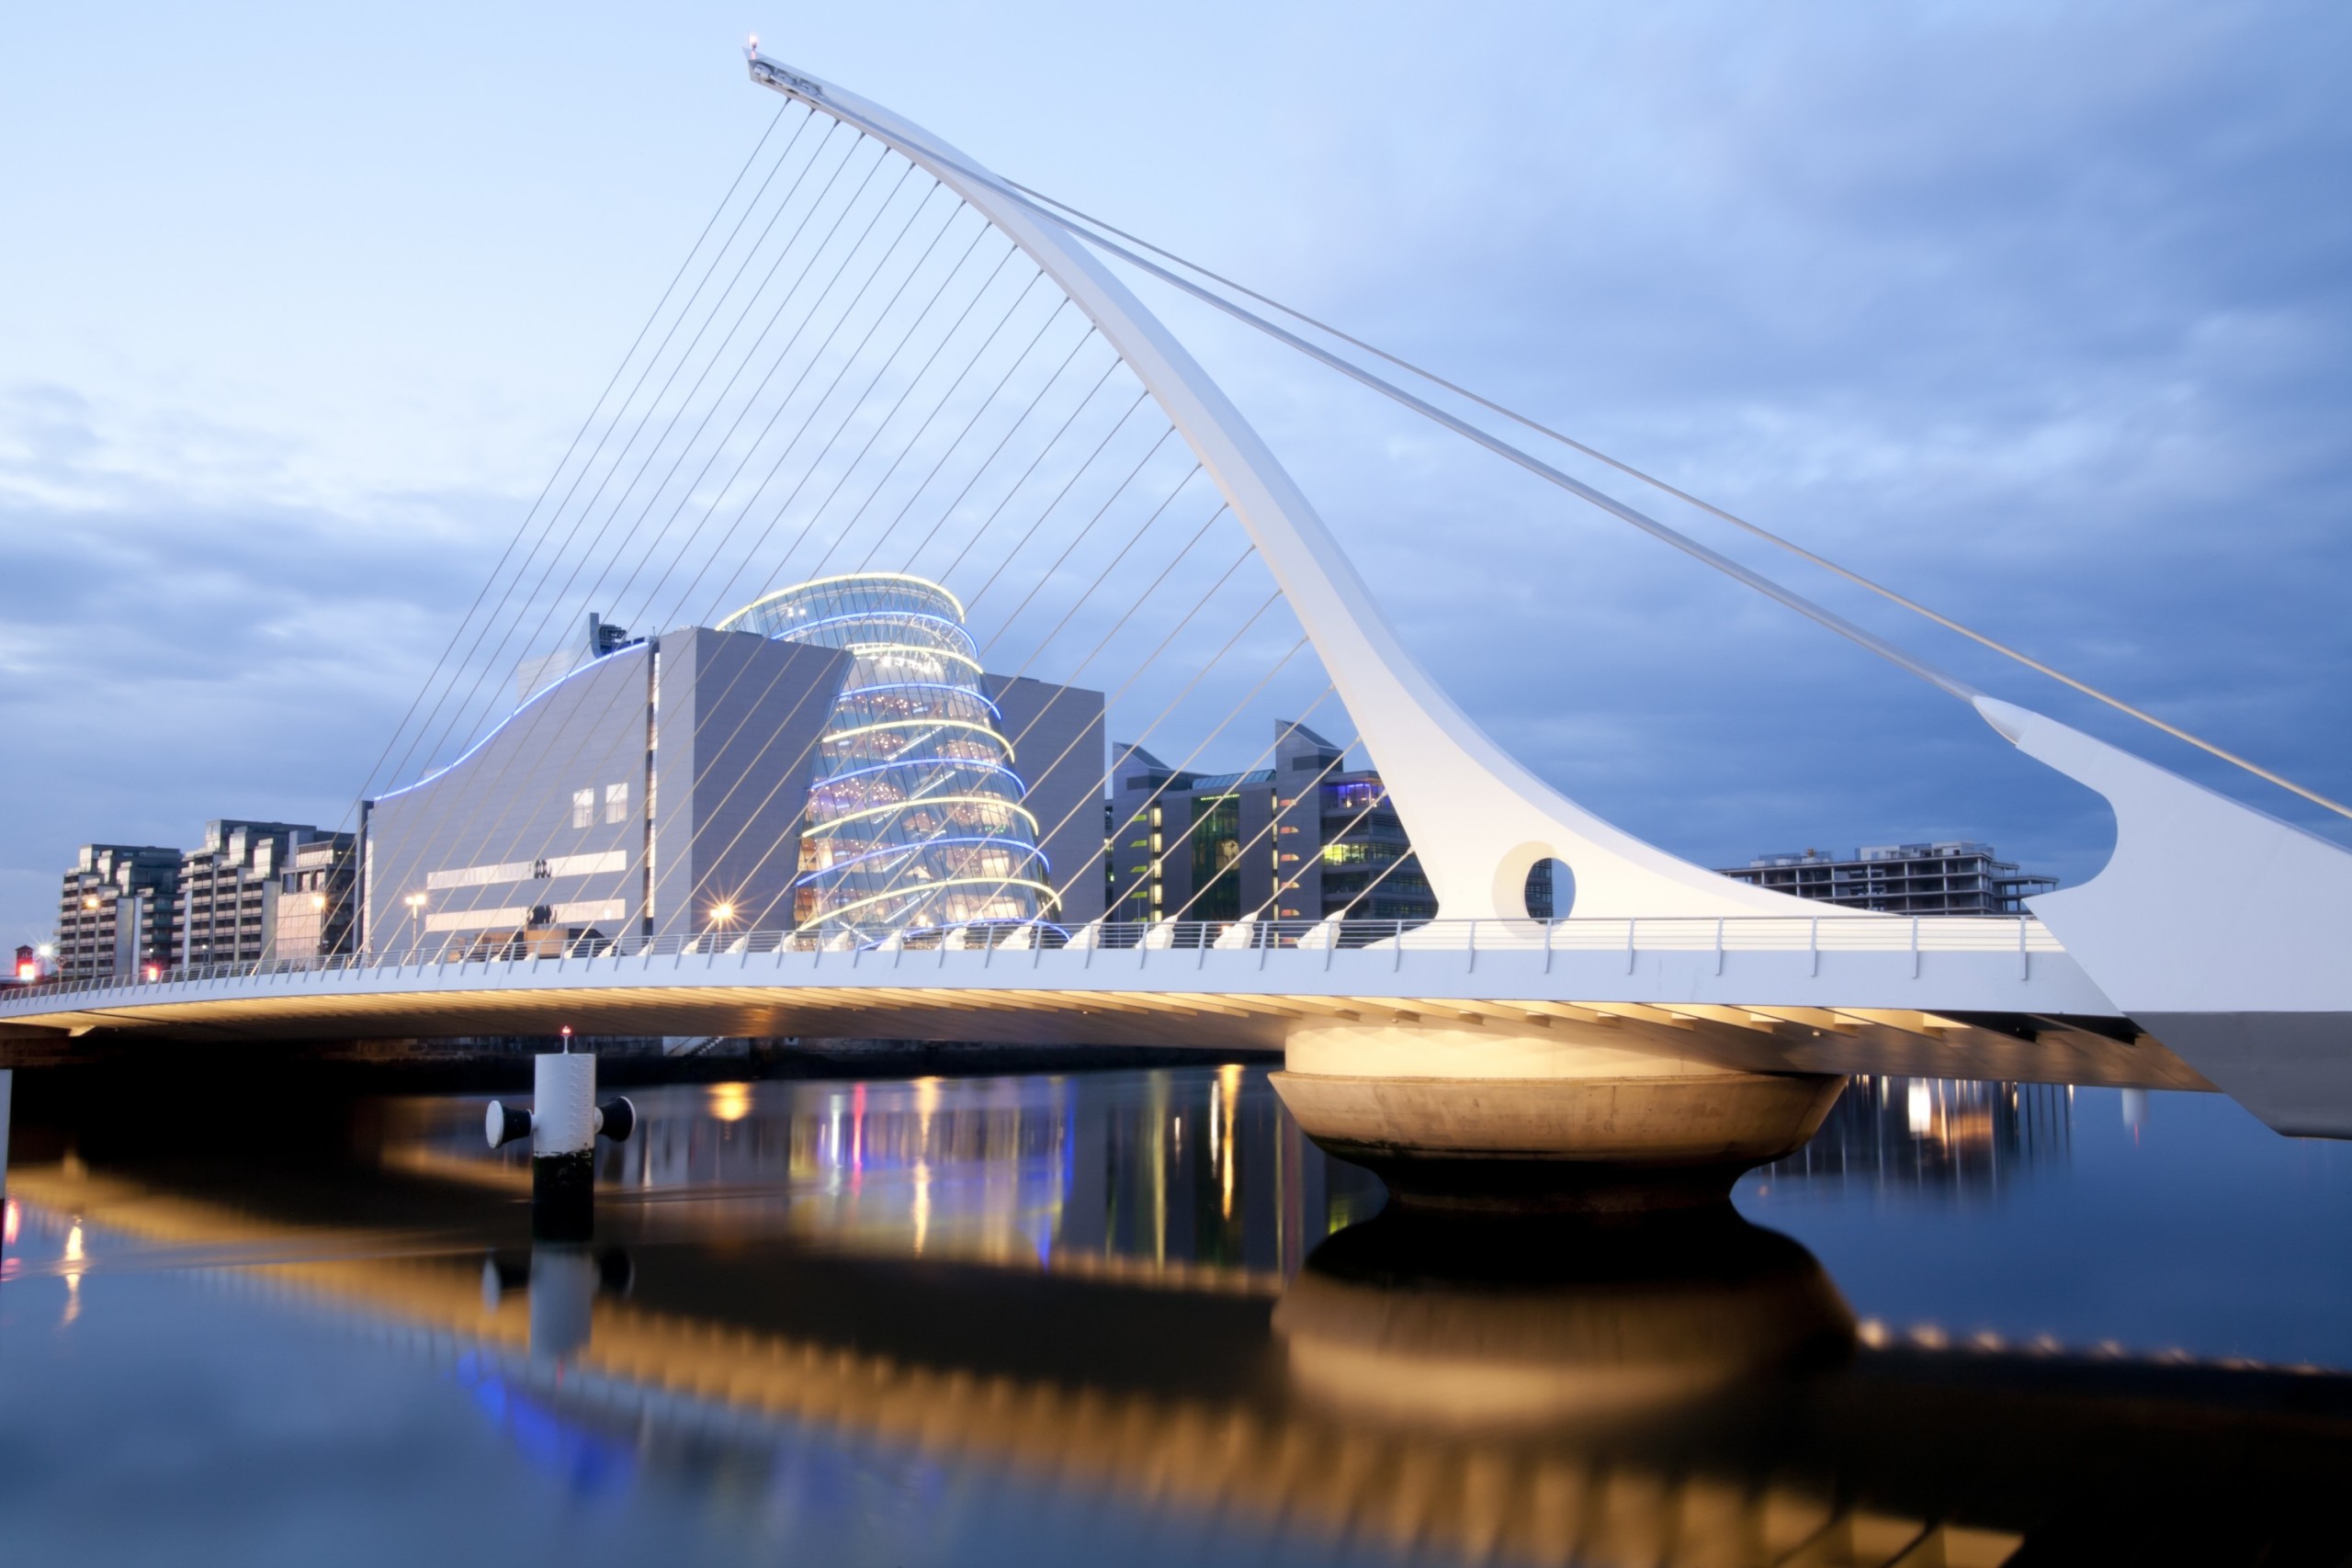 Graebel to Create 125 New Jobs in EMEA Financial Shared Services and Operations Center in Ireland